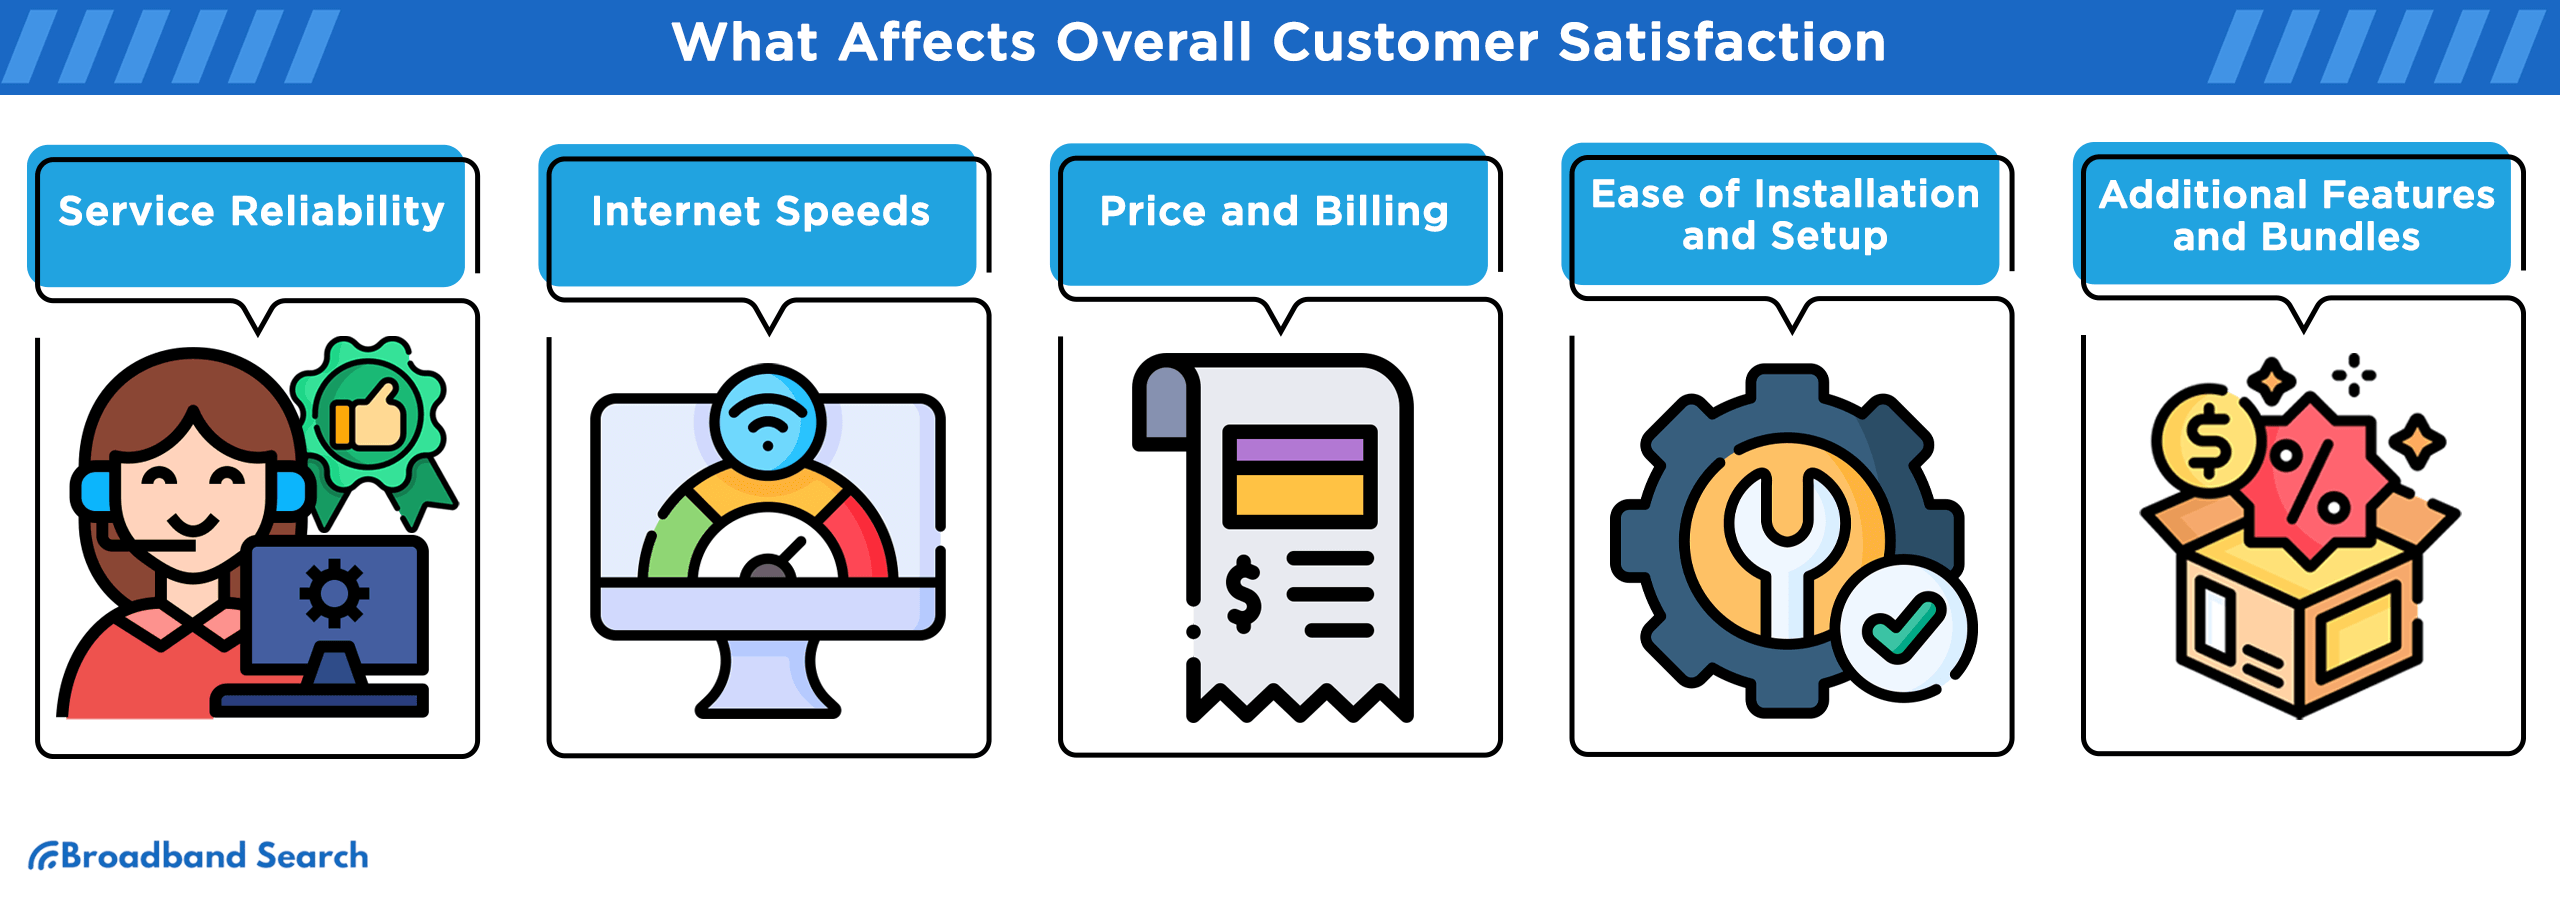 factors that affect overall customer satisfaction